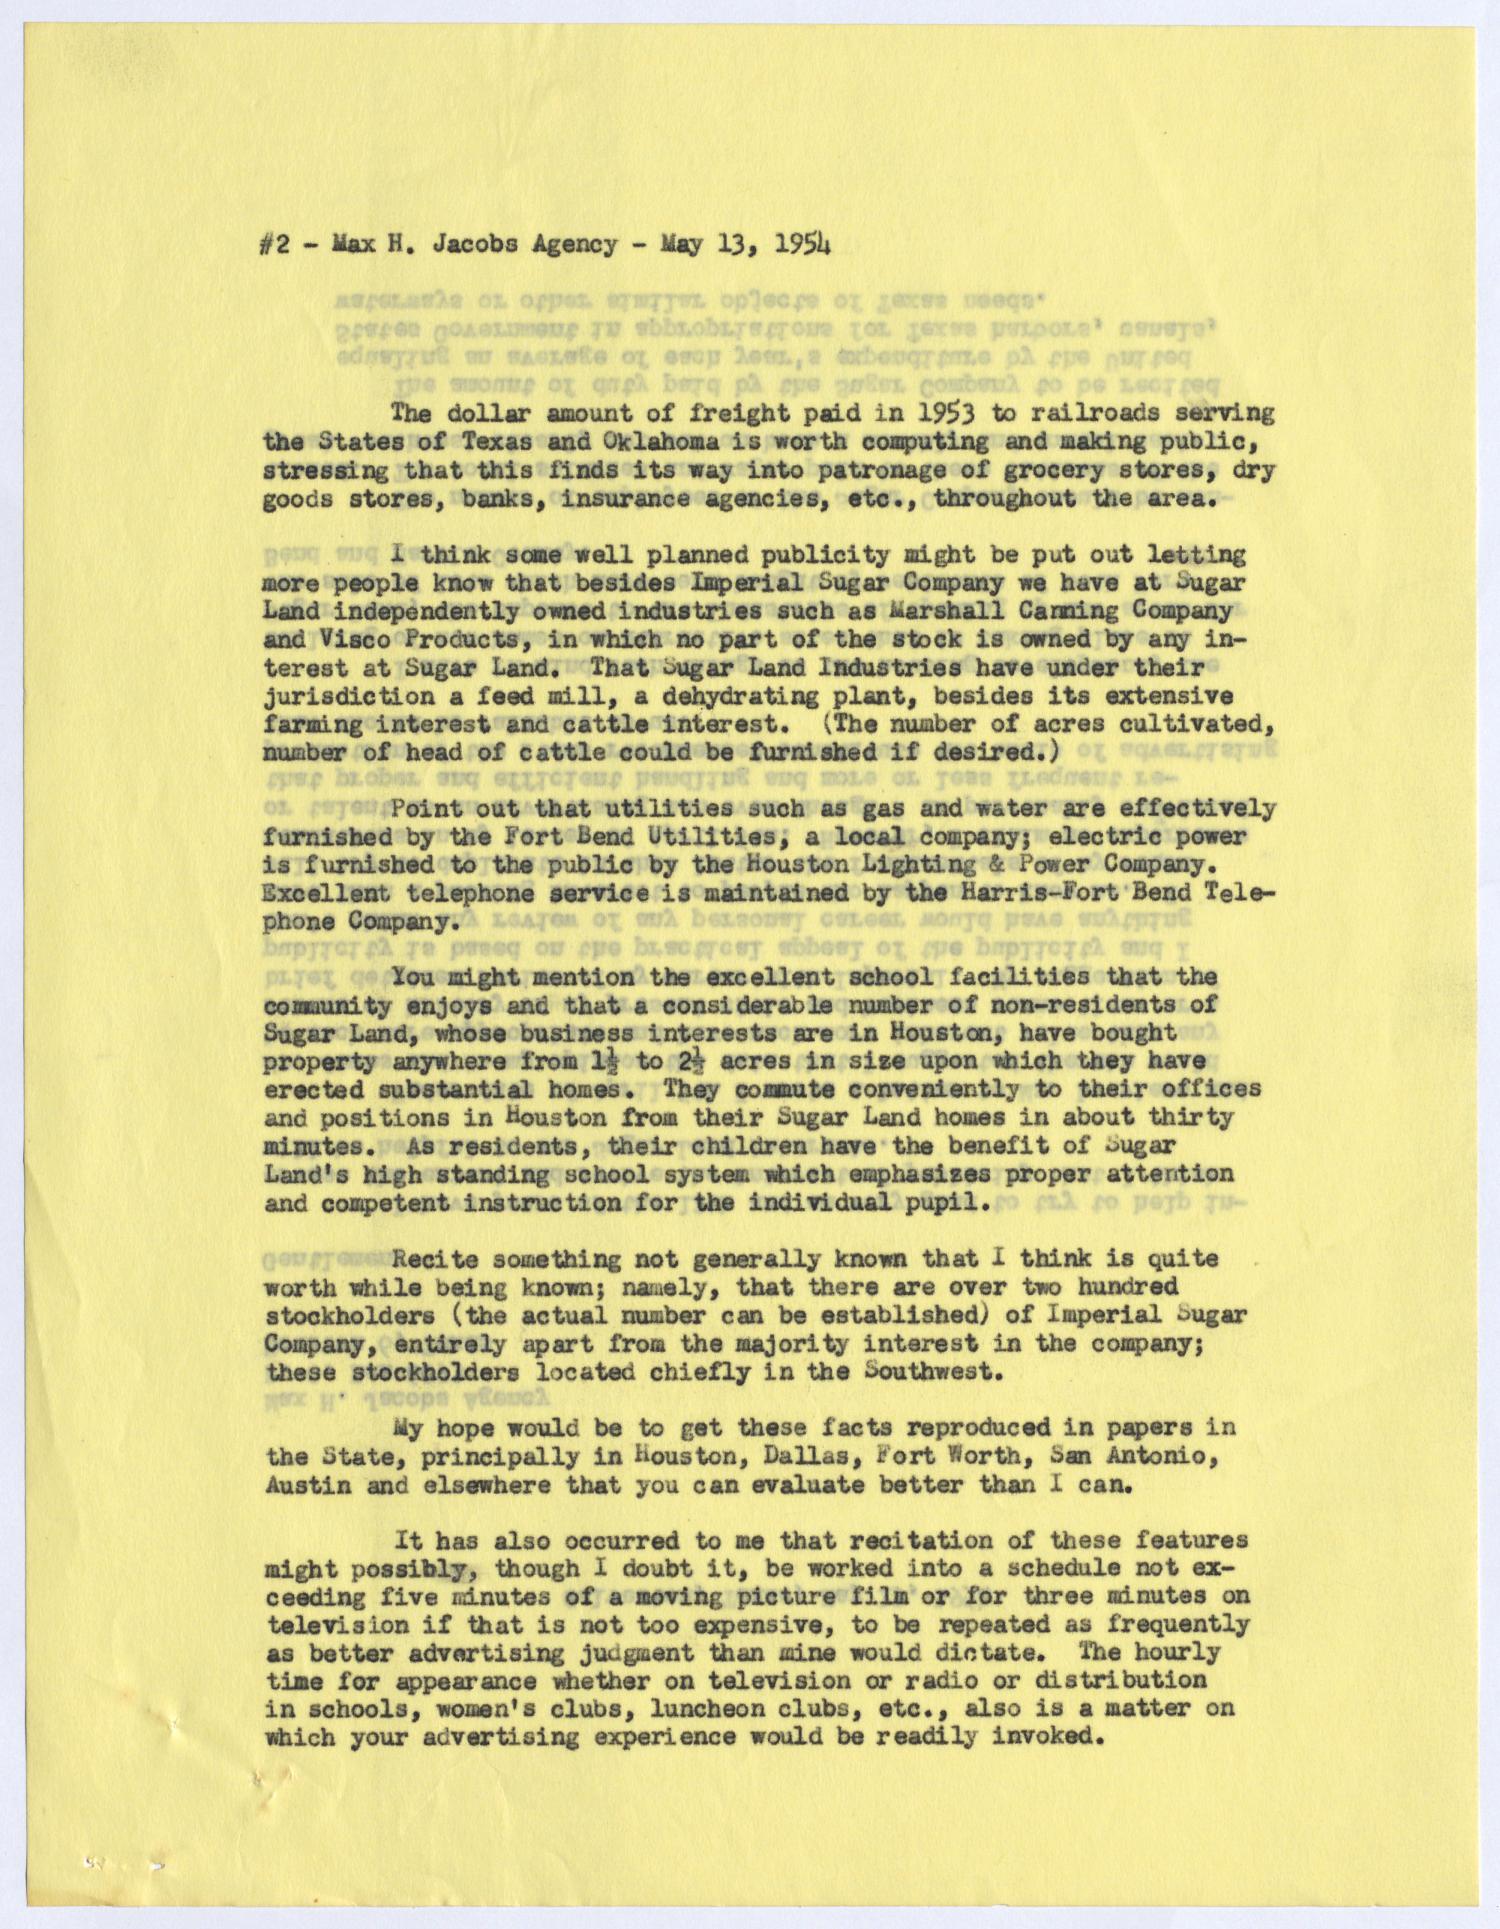 [Letter from I. H. Kempner to Max H. Jacobs Agency, May 13, 1954]
                                                
                                                    [Sequence #]: 2 of 4
                                                